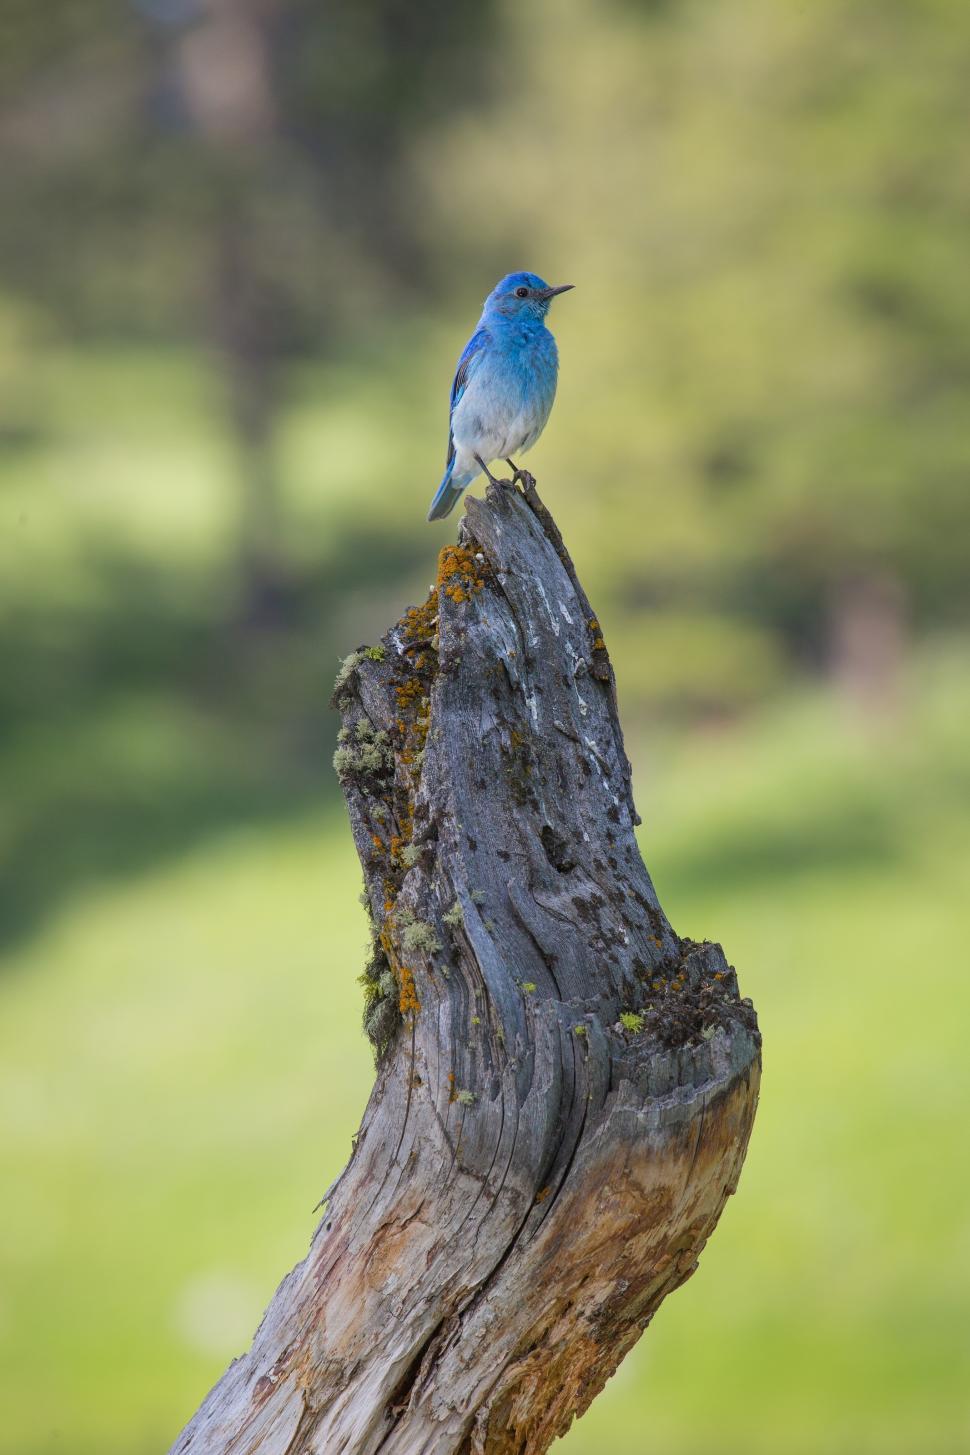 Free Image of Small Blue Bird Perched on Tree Stump 